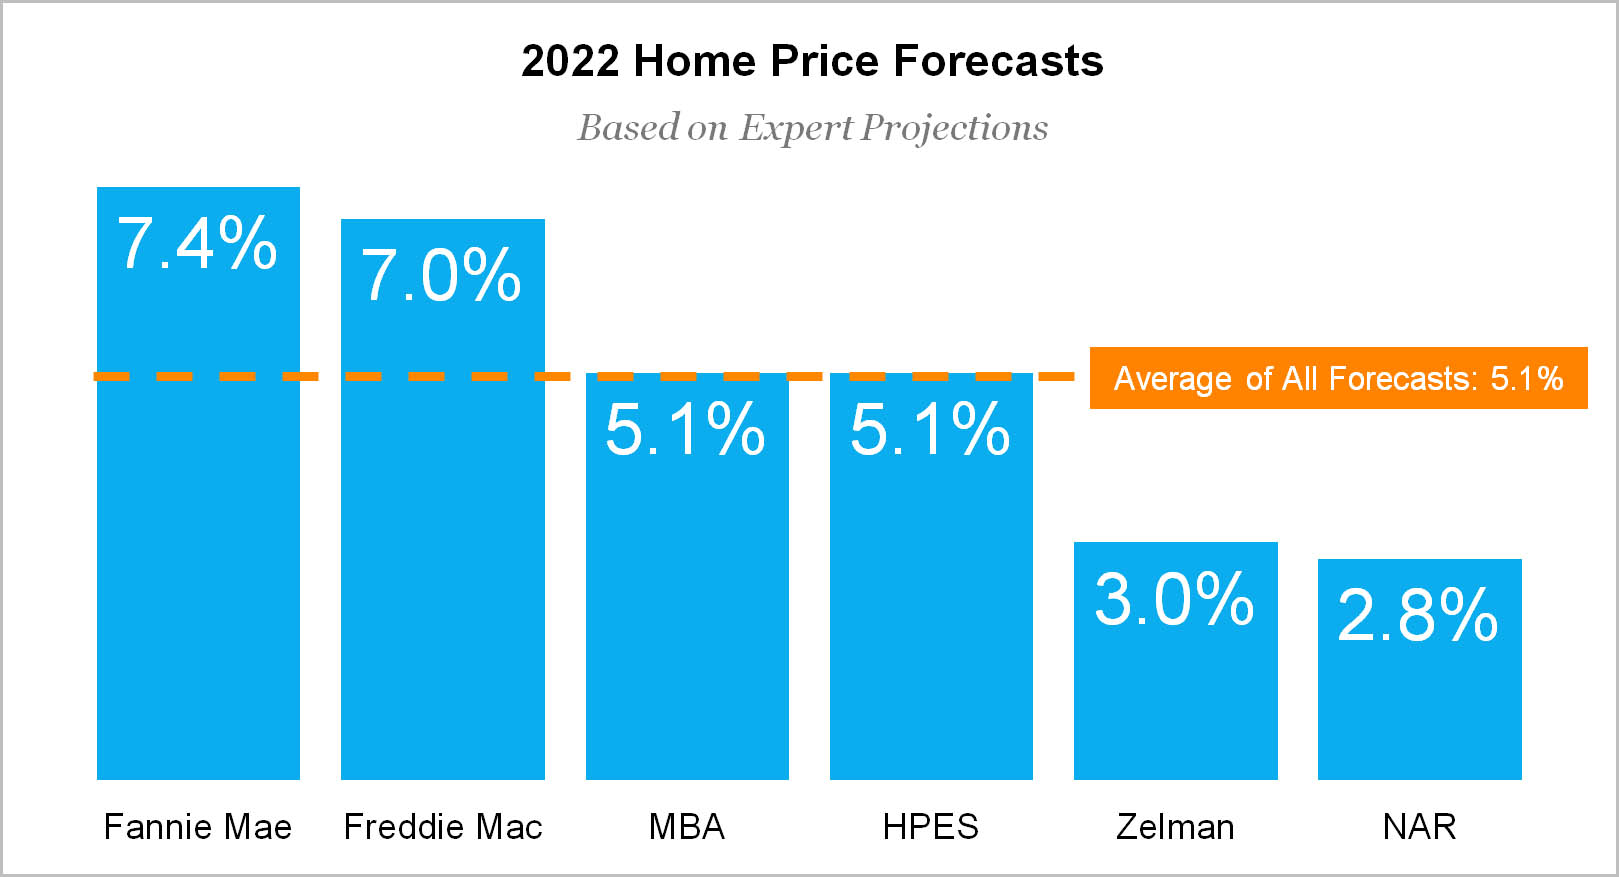 2022 Home Price Forecasts